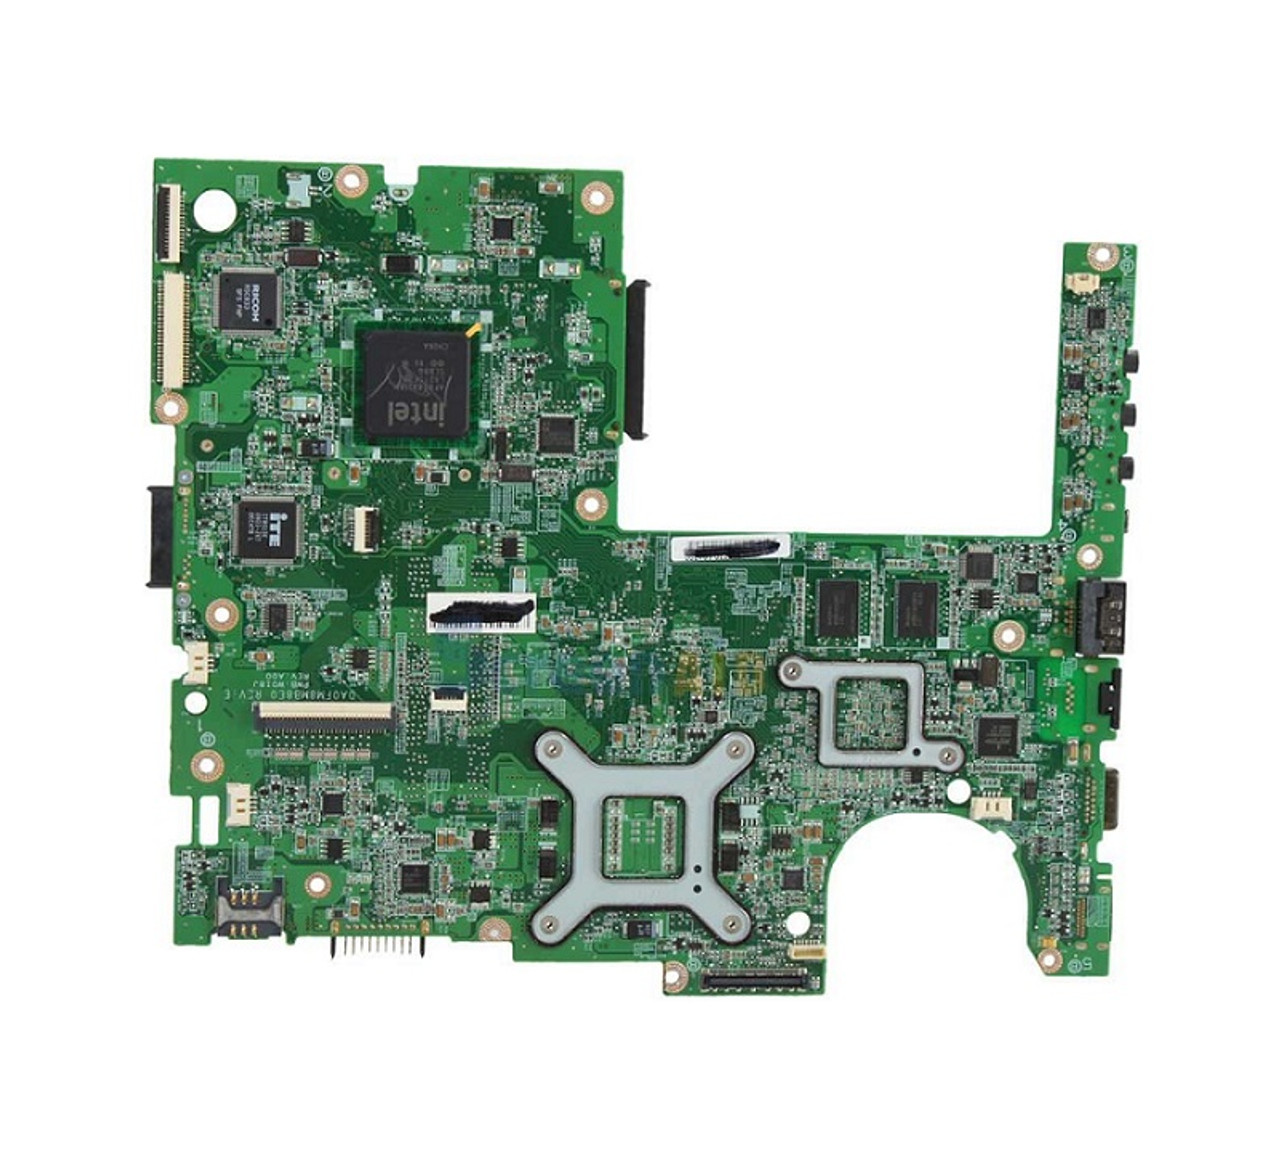 06G040 - Dell System Board (Motherboard) for Inspiron 8200, C840 (Refurbished)